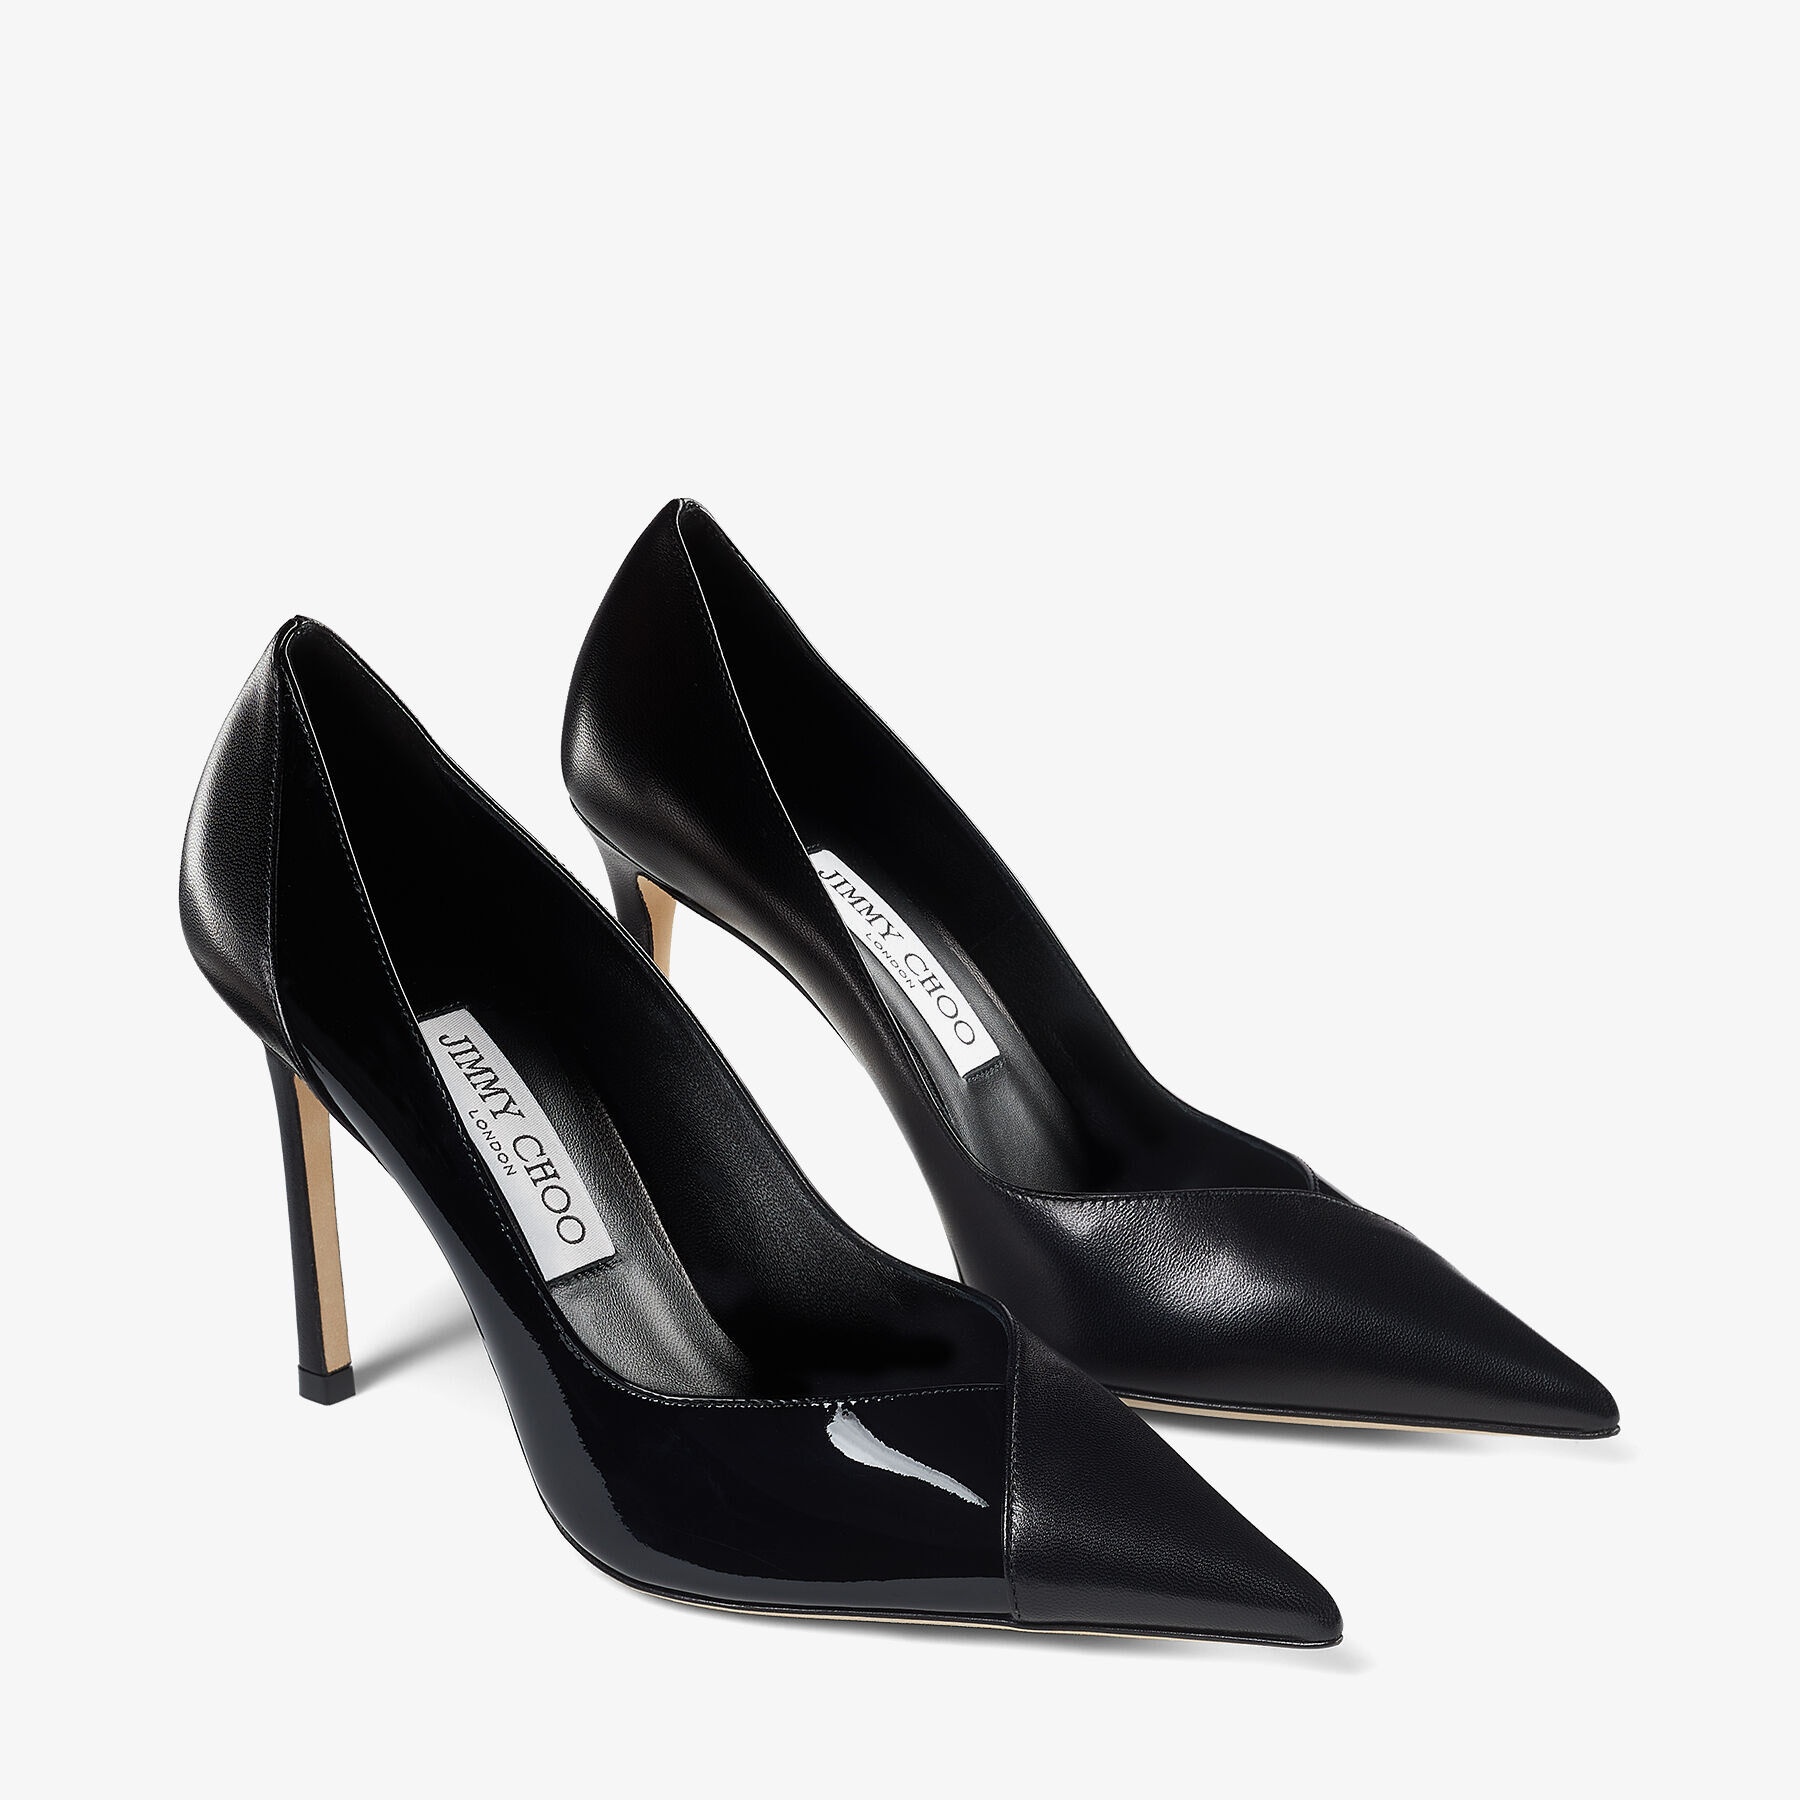 Cass 95
Black Nappa and Patent Leather Pumps - 3